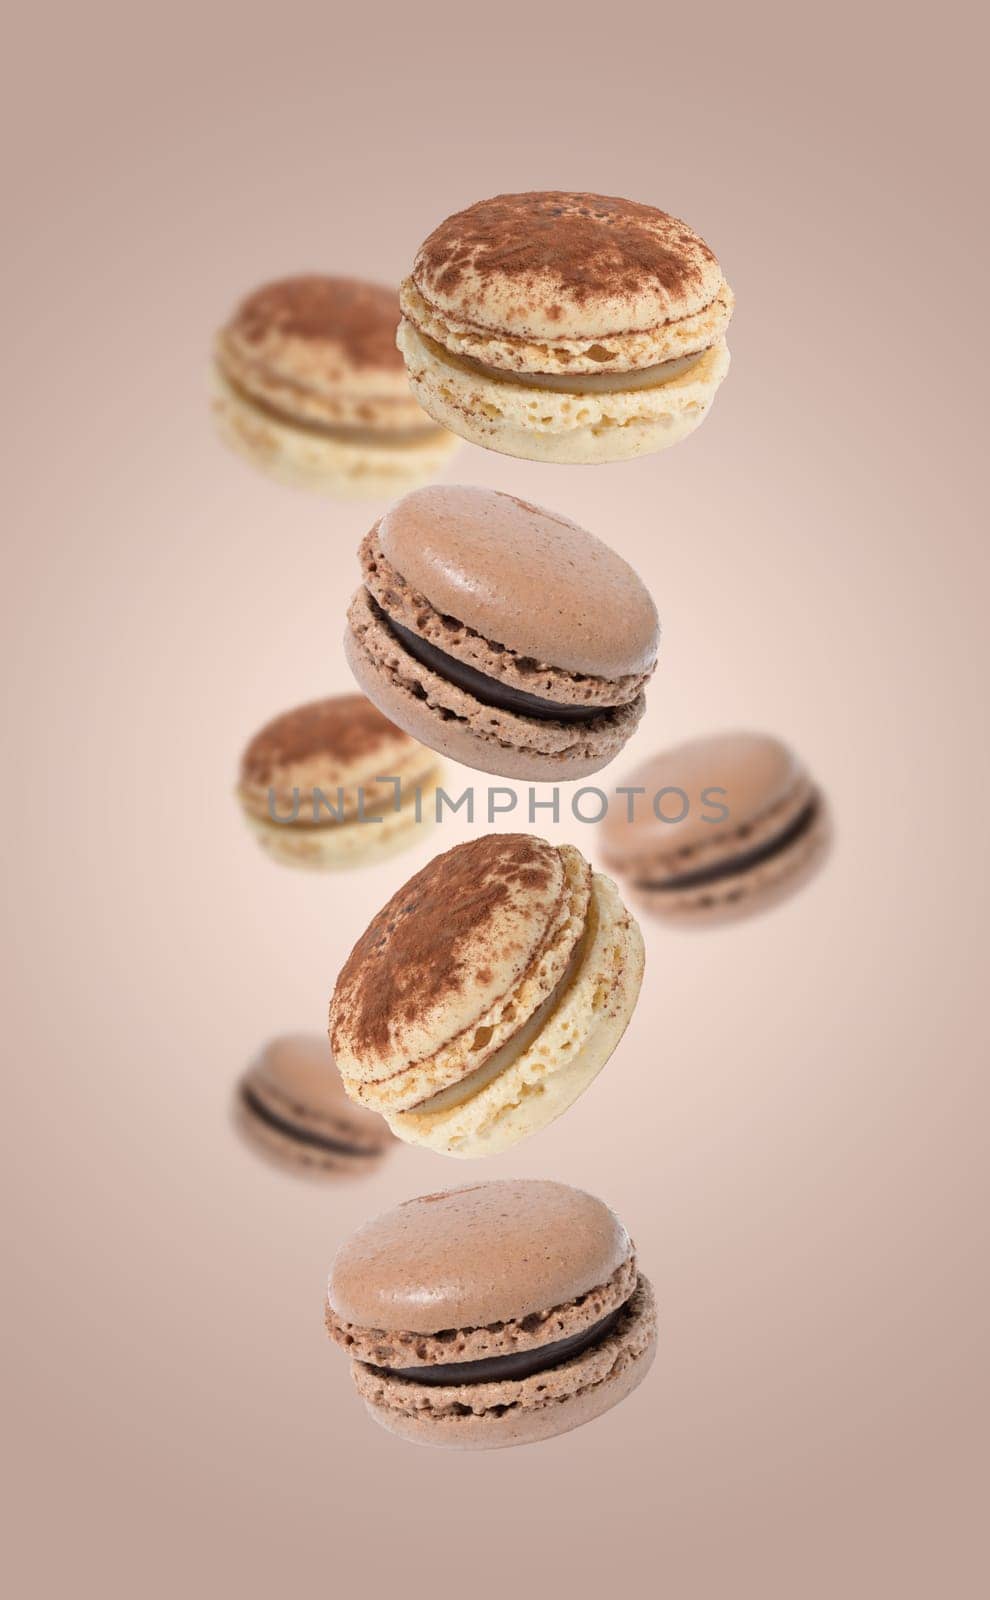 Chocolate macarons levitate on a light brown background by ndanko